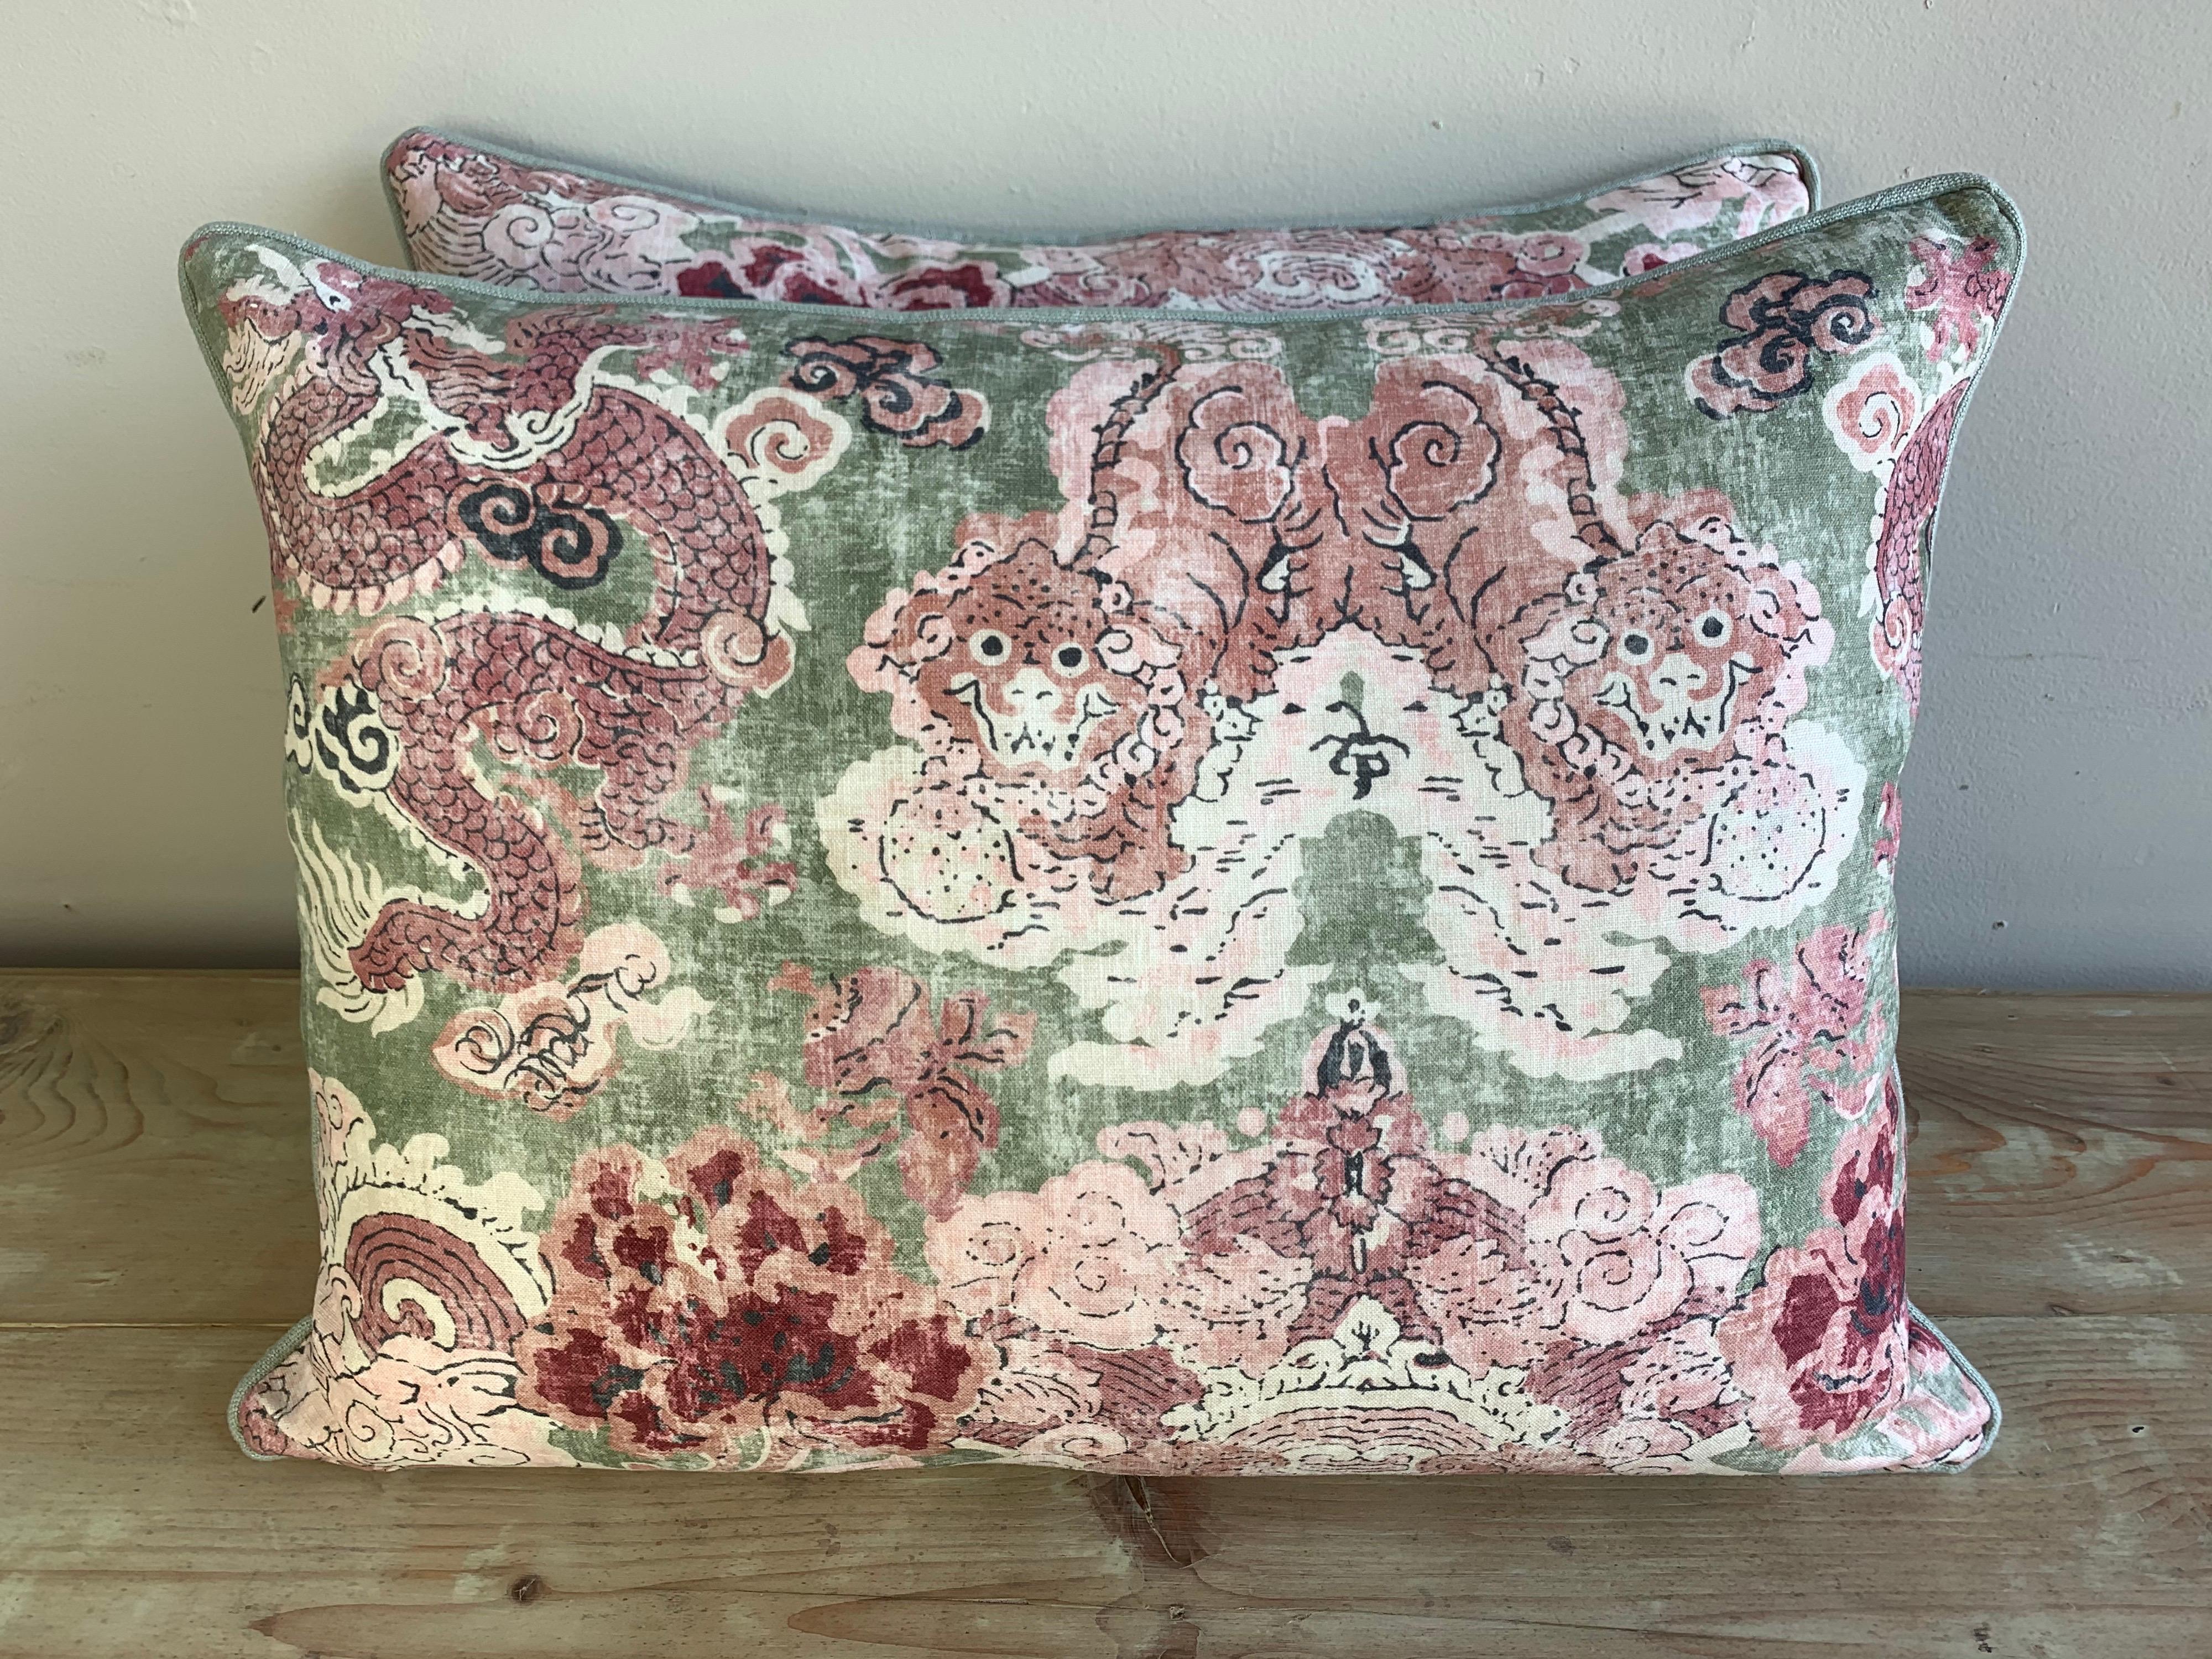 Pair of custom pillows made with a printed chinoiserie cotton front and a coordinating green back and self welt detail. Down inserts, sewn shut.